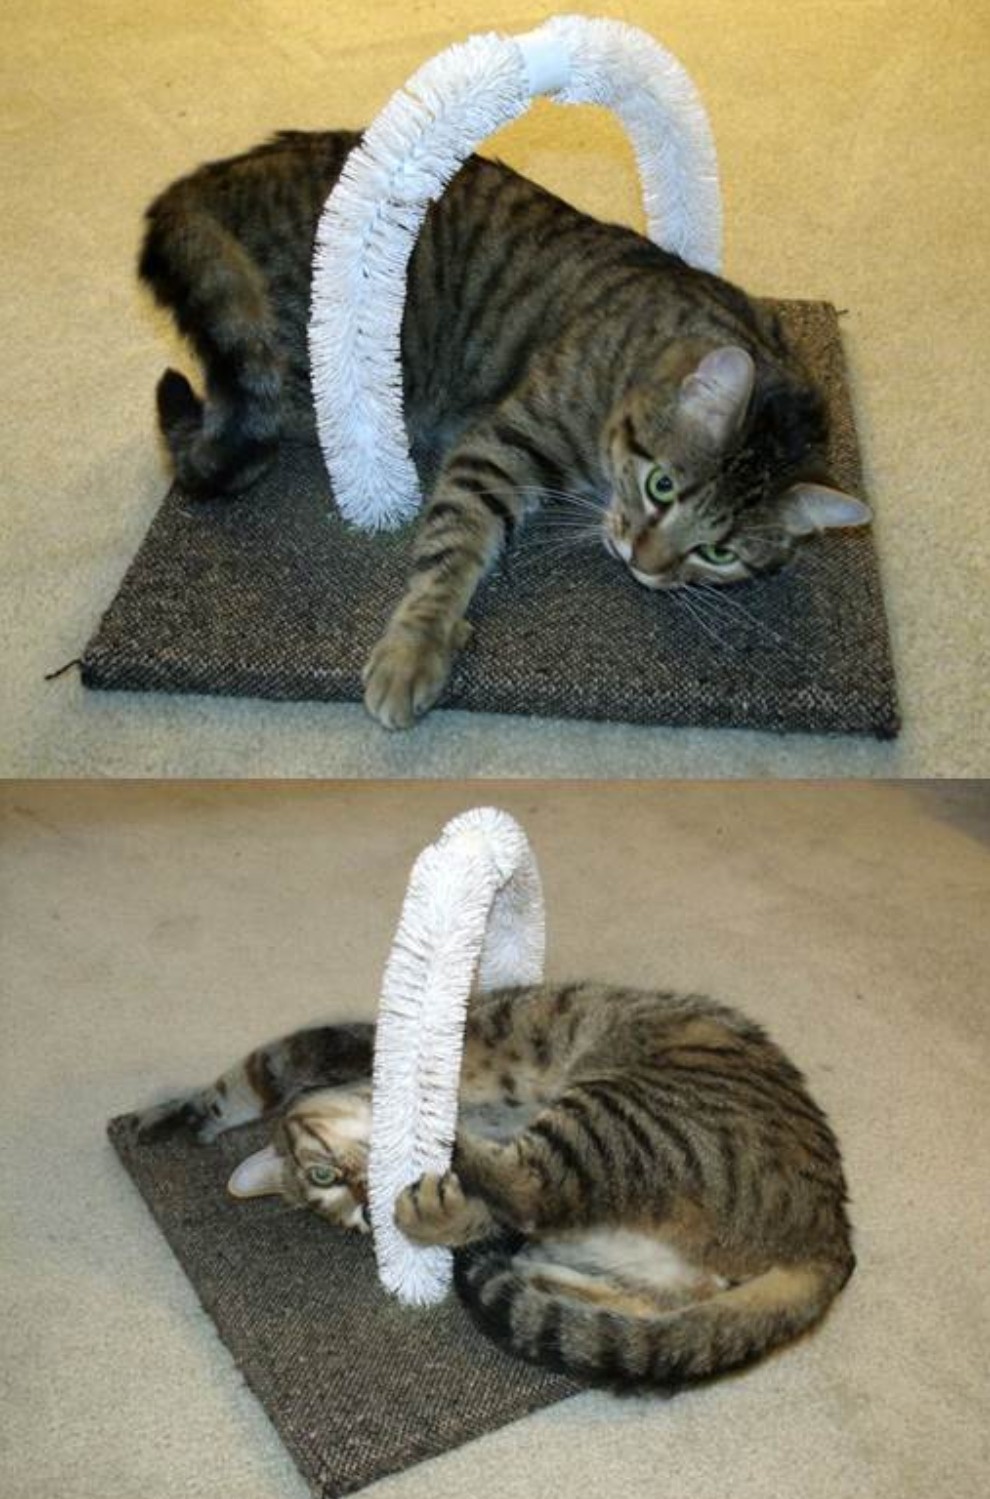 Cat using self-scratching post using toilet brushes